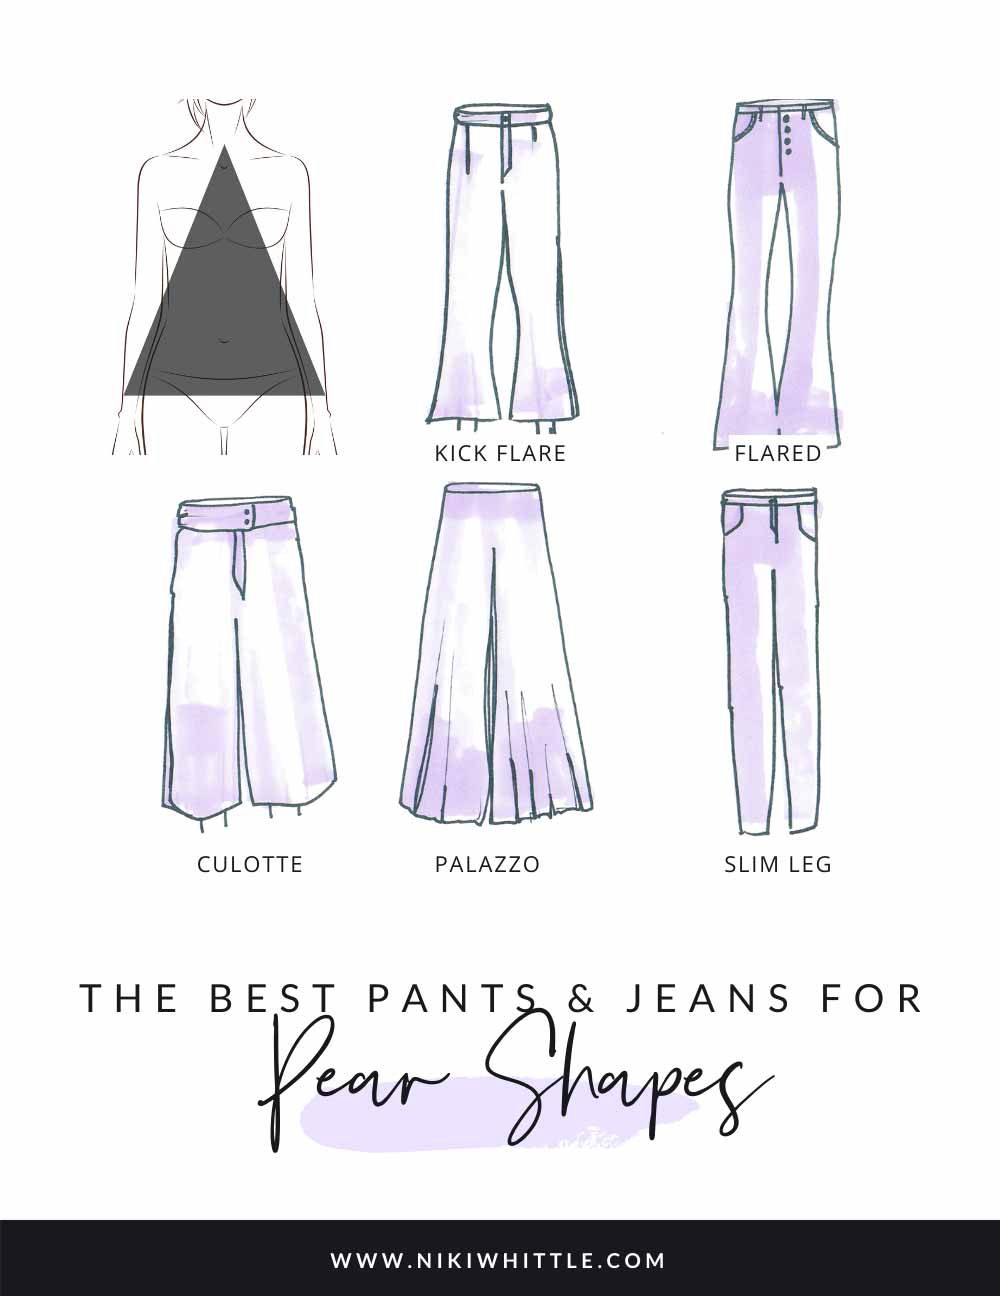 pear shaped body? How to dress for the pear shape body type  Pear shaped  outfits, Pear body shape, Pear body shape outfits